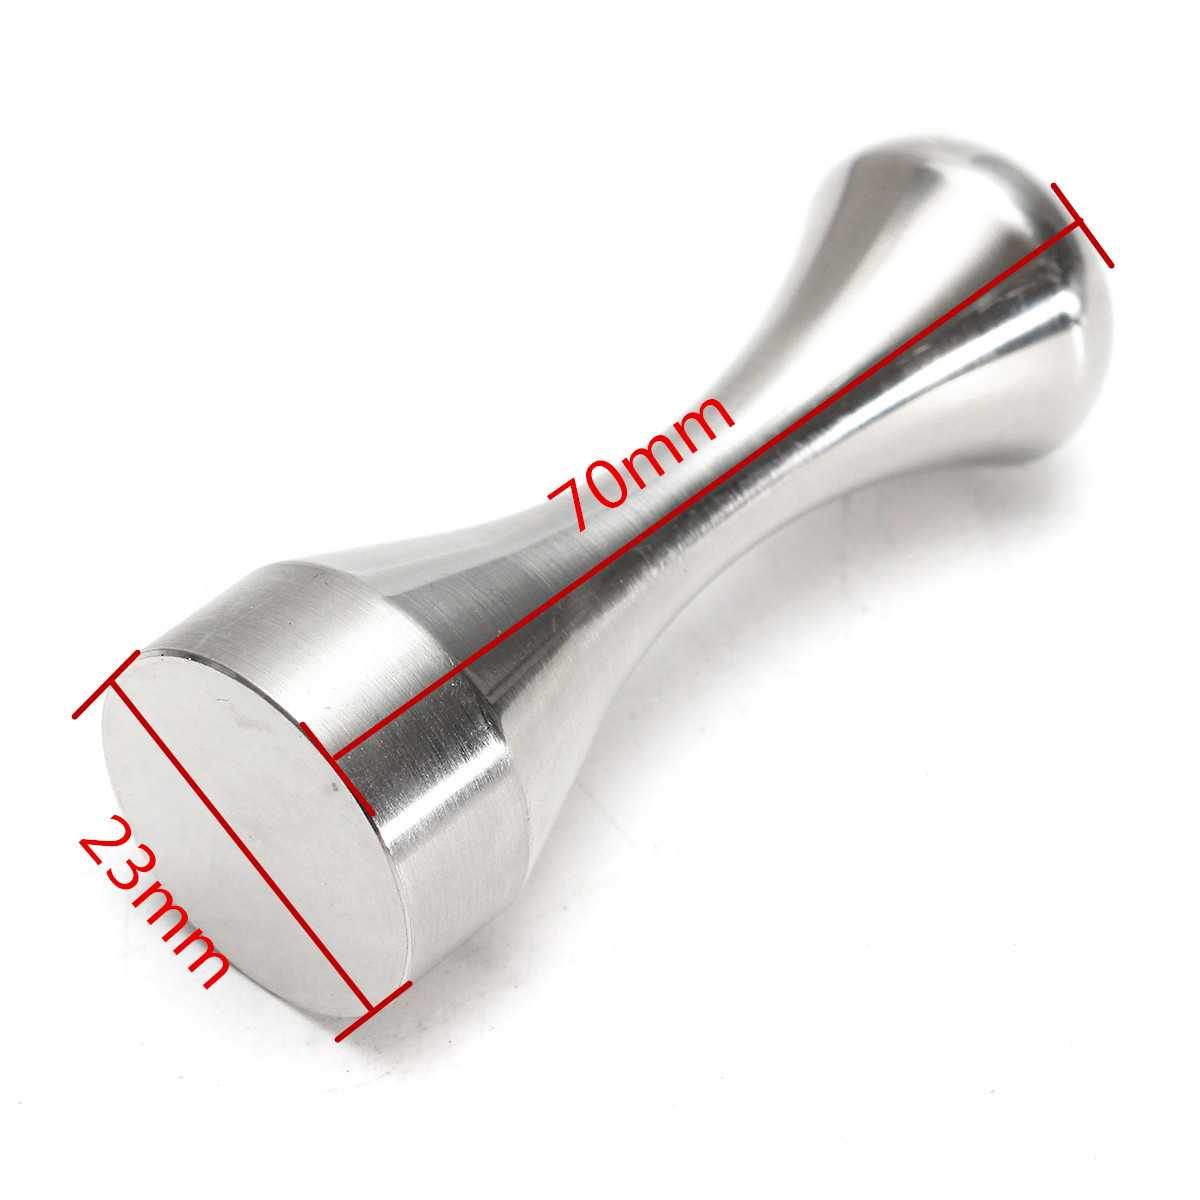 Stainless-Steel-Coffee-Tamper-For-Refillable-Reusable-Capsule-Coffee-Bean-Press-1166895-5